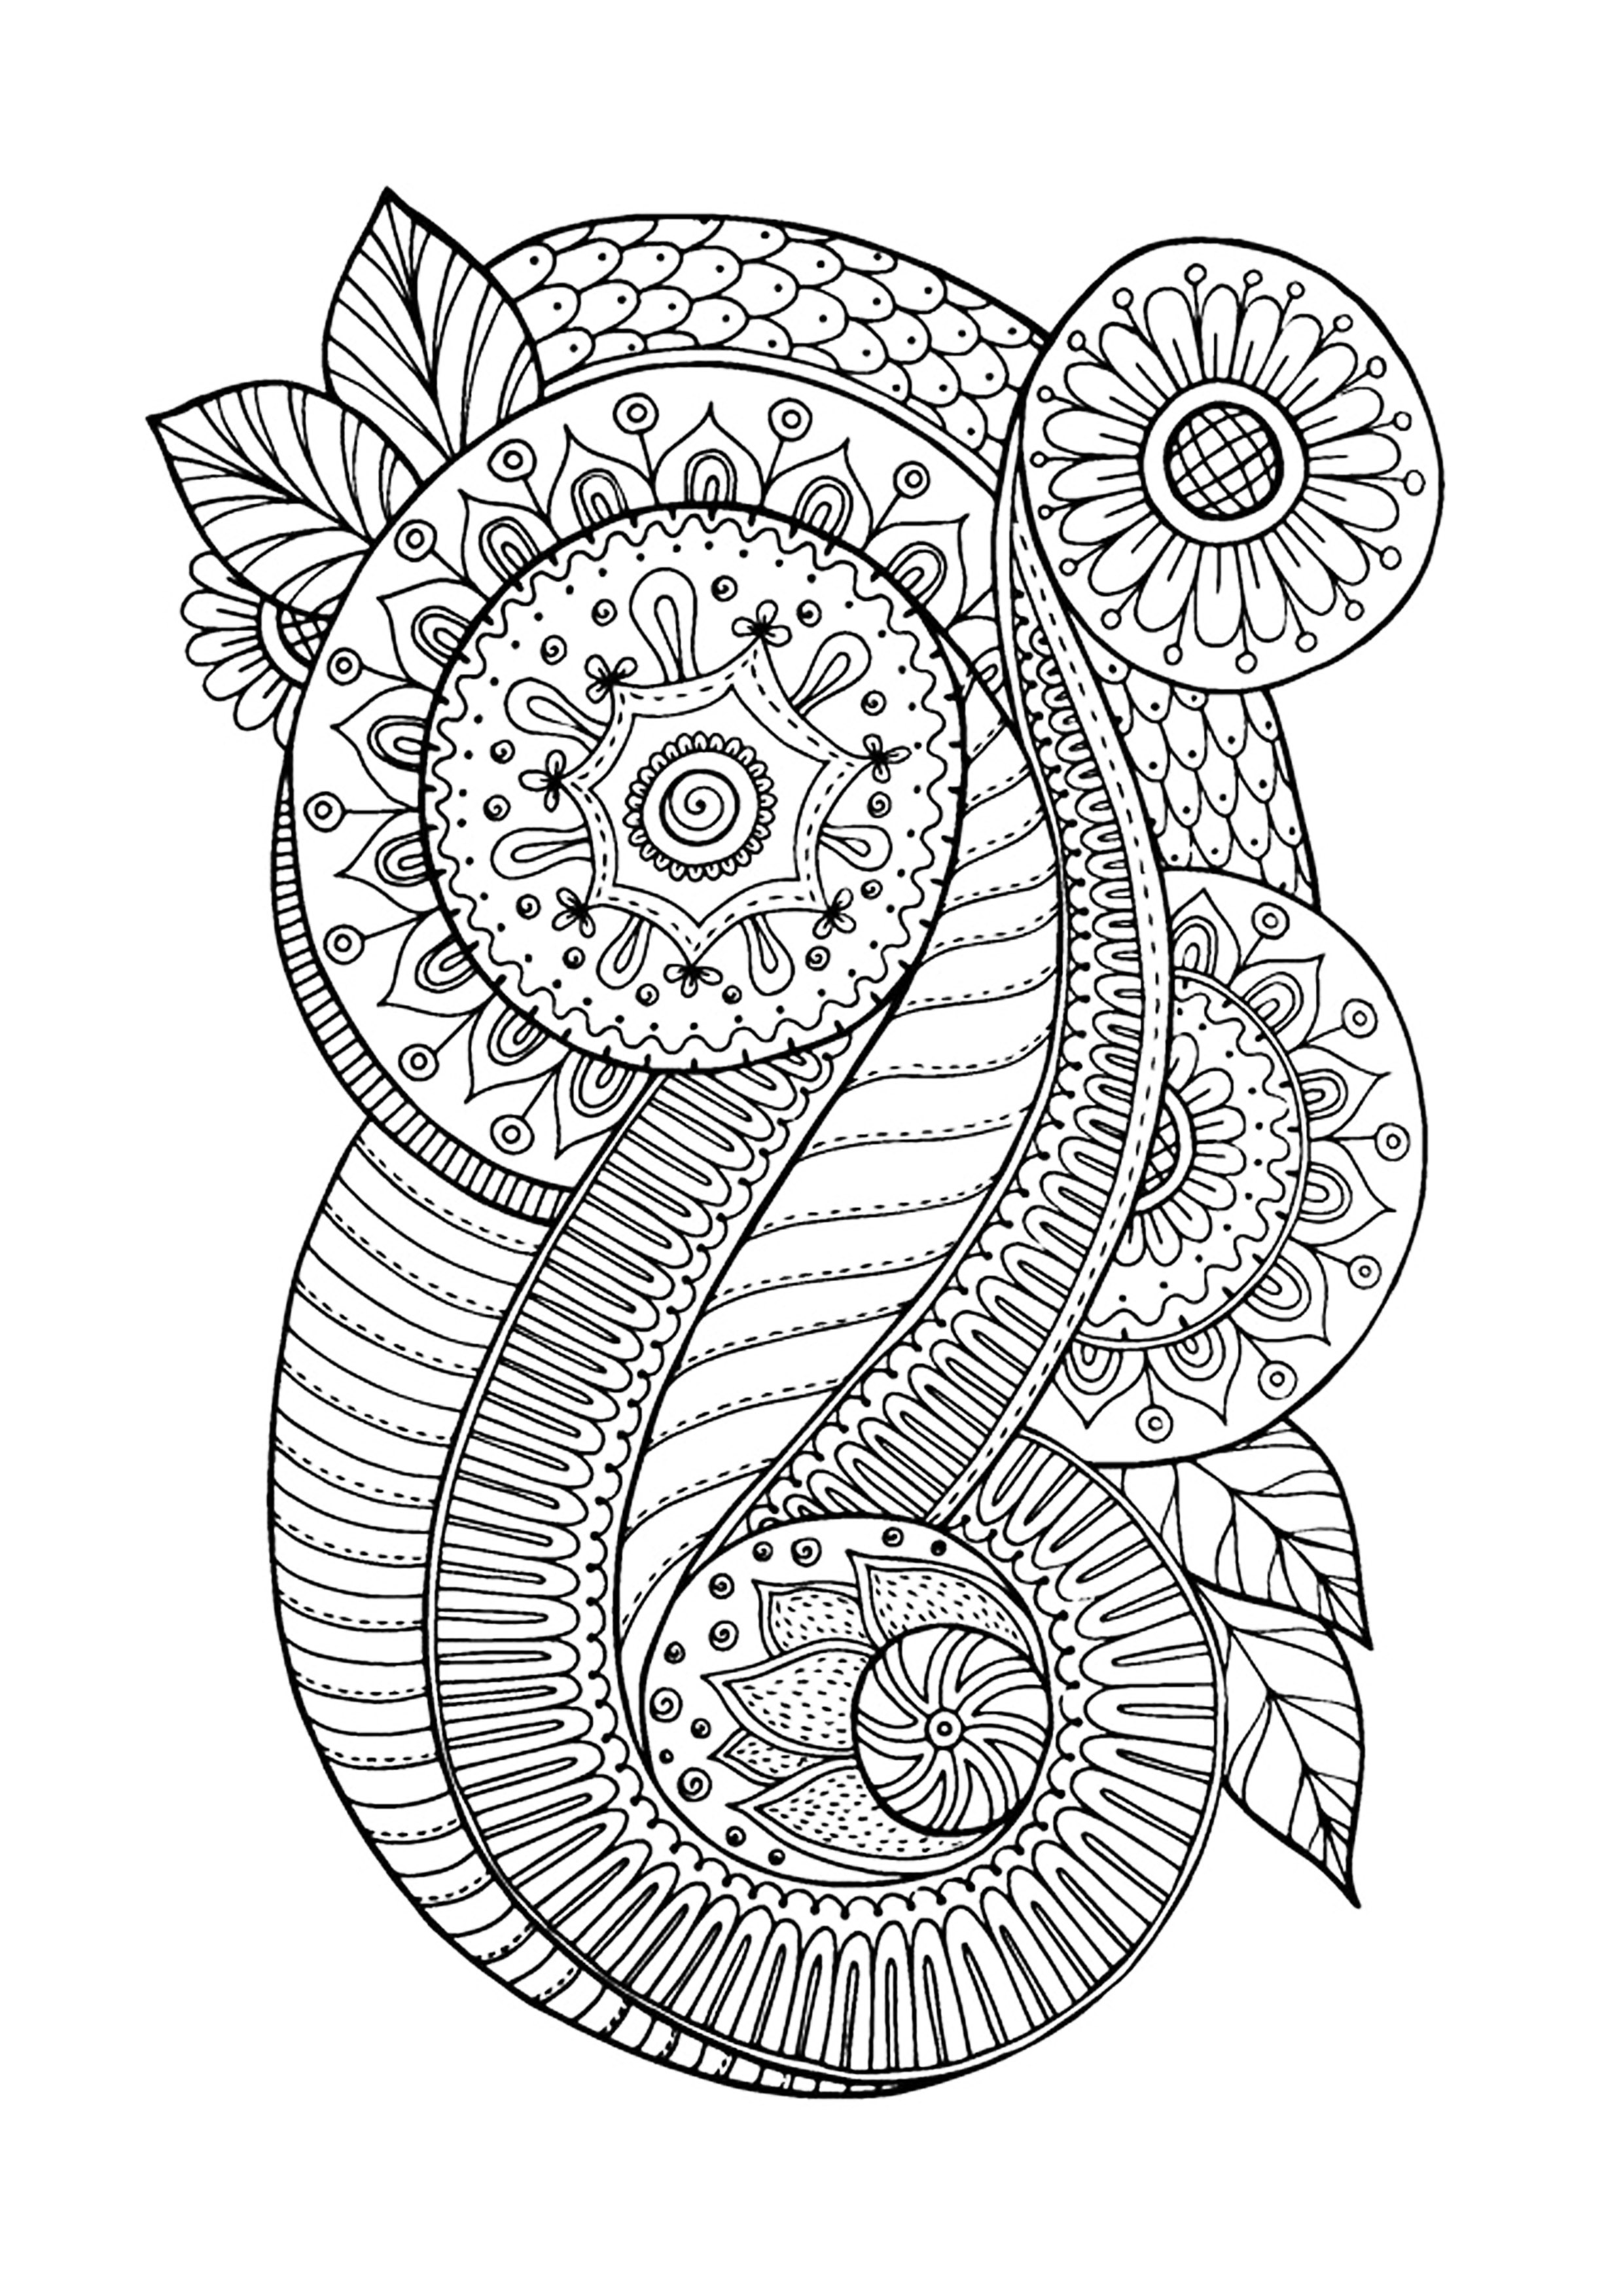 Download Abstract Coloring Pages For Adults